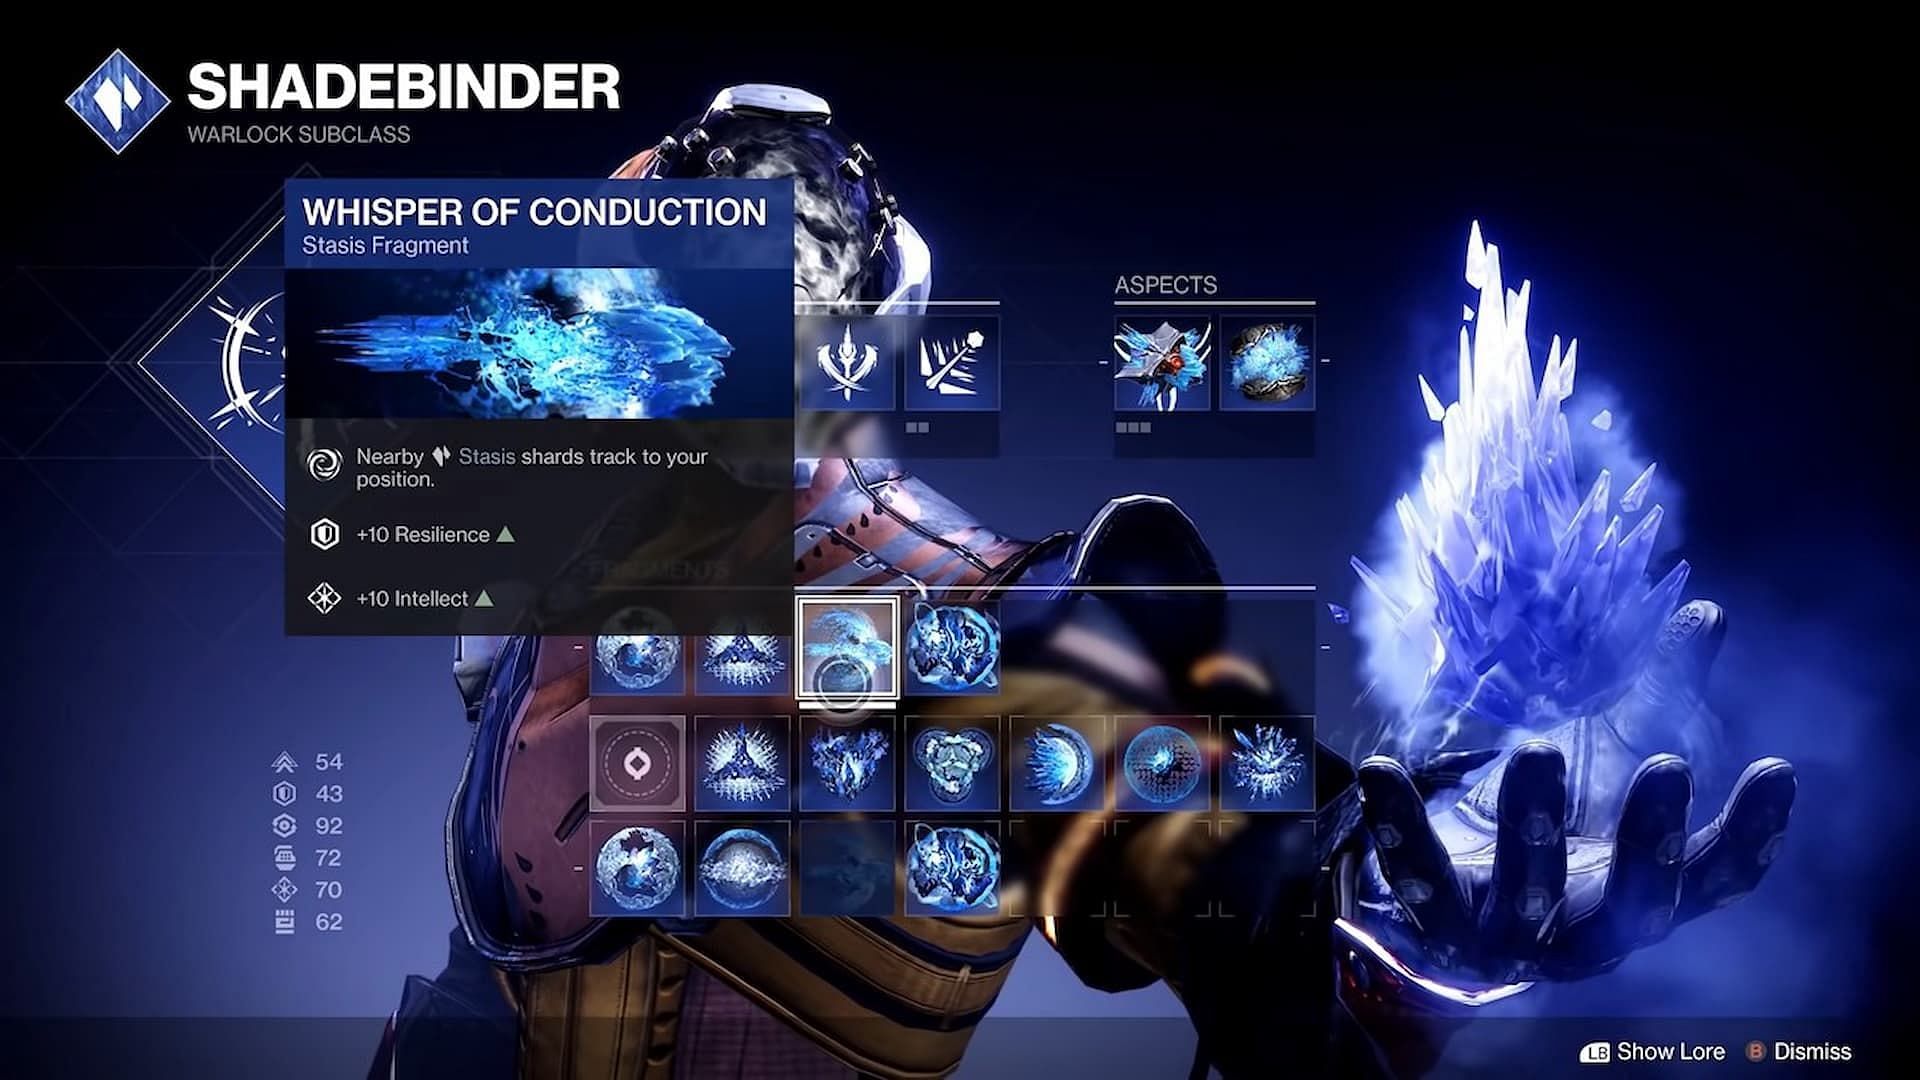 Whisper of Conduction is best paired with the Whisper of Rime fragment (Image via Bungie)